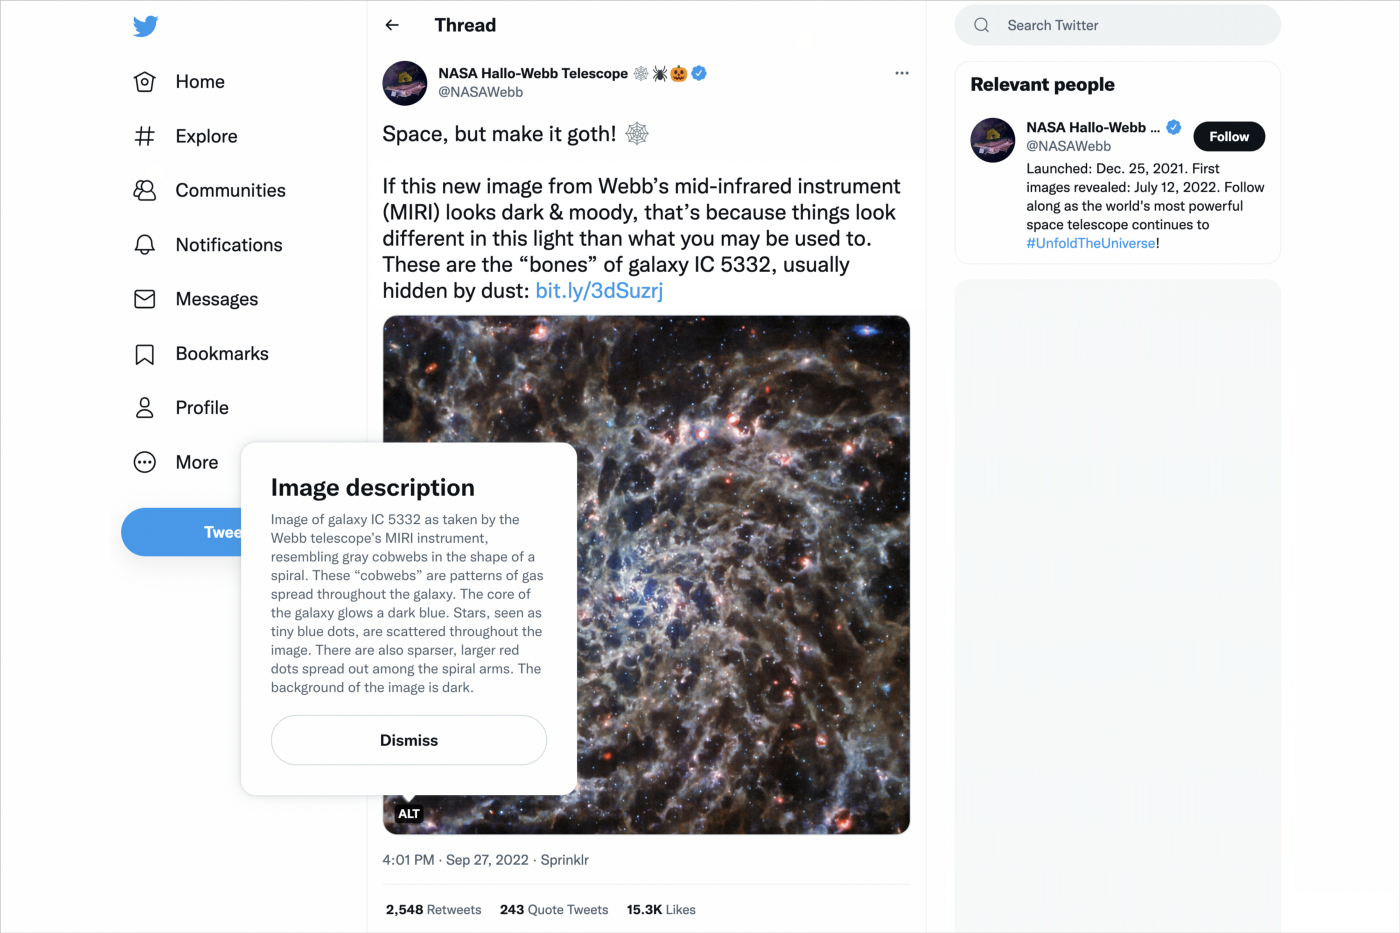 NASA’s tweet with an image of a “goth” galaxy hidden in the dust and a detailed image description.